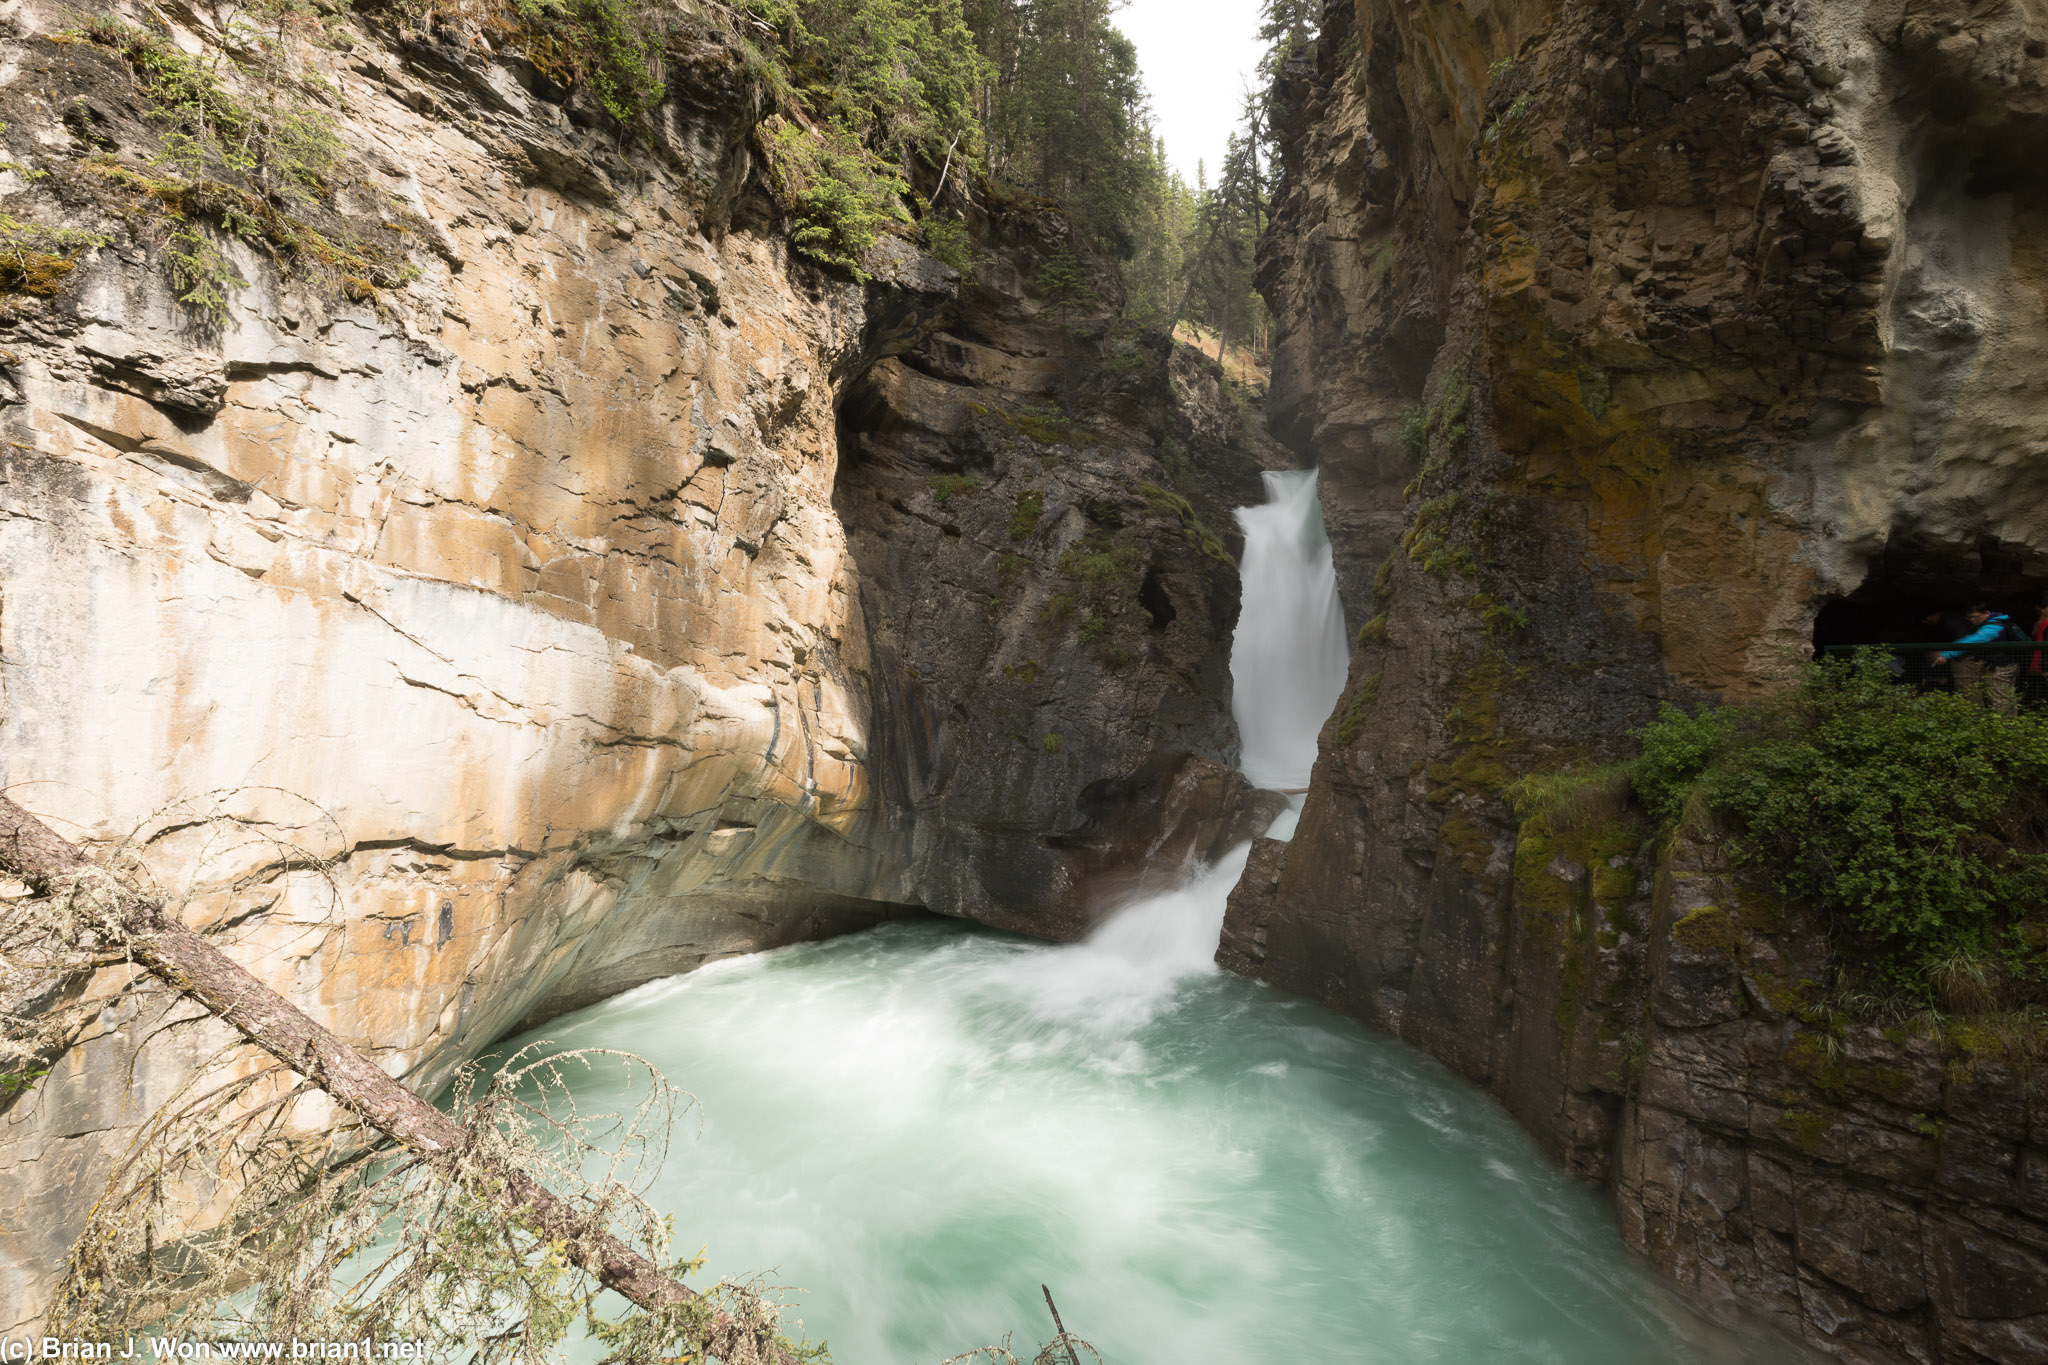 Lower Falls, Johnston Canyon. Note closer viewing access on the right, if you wanted to wait in line.